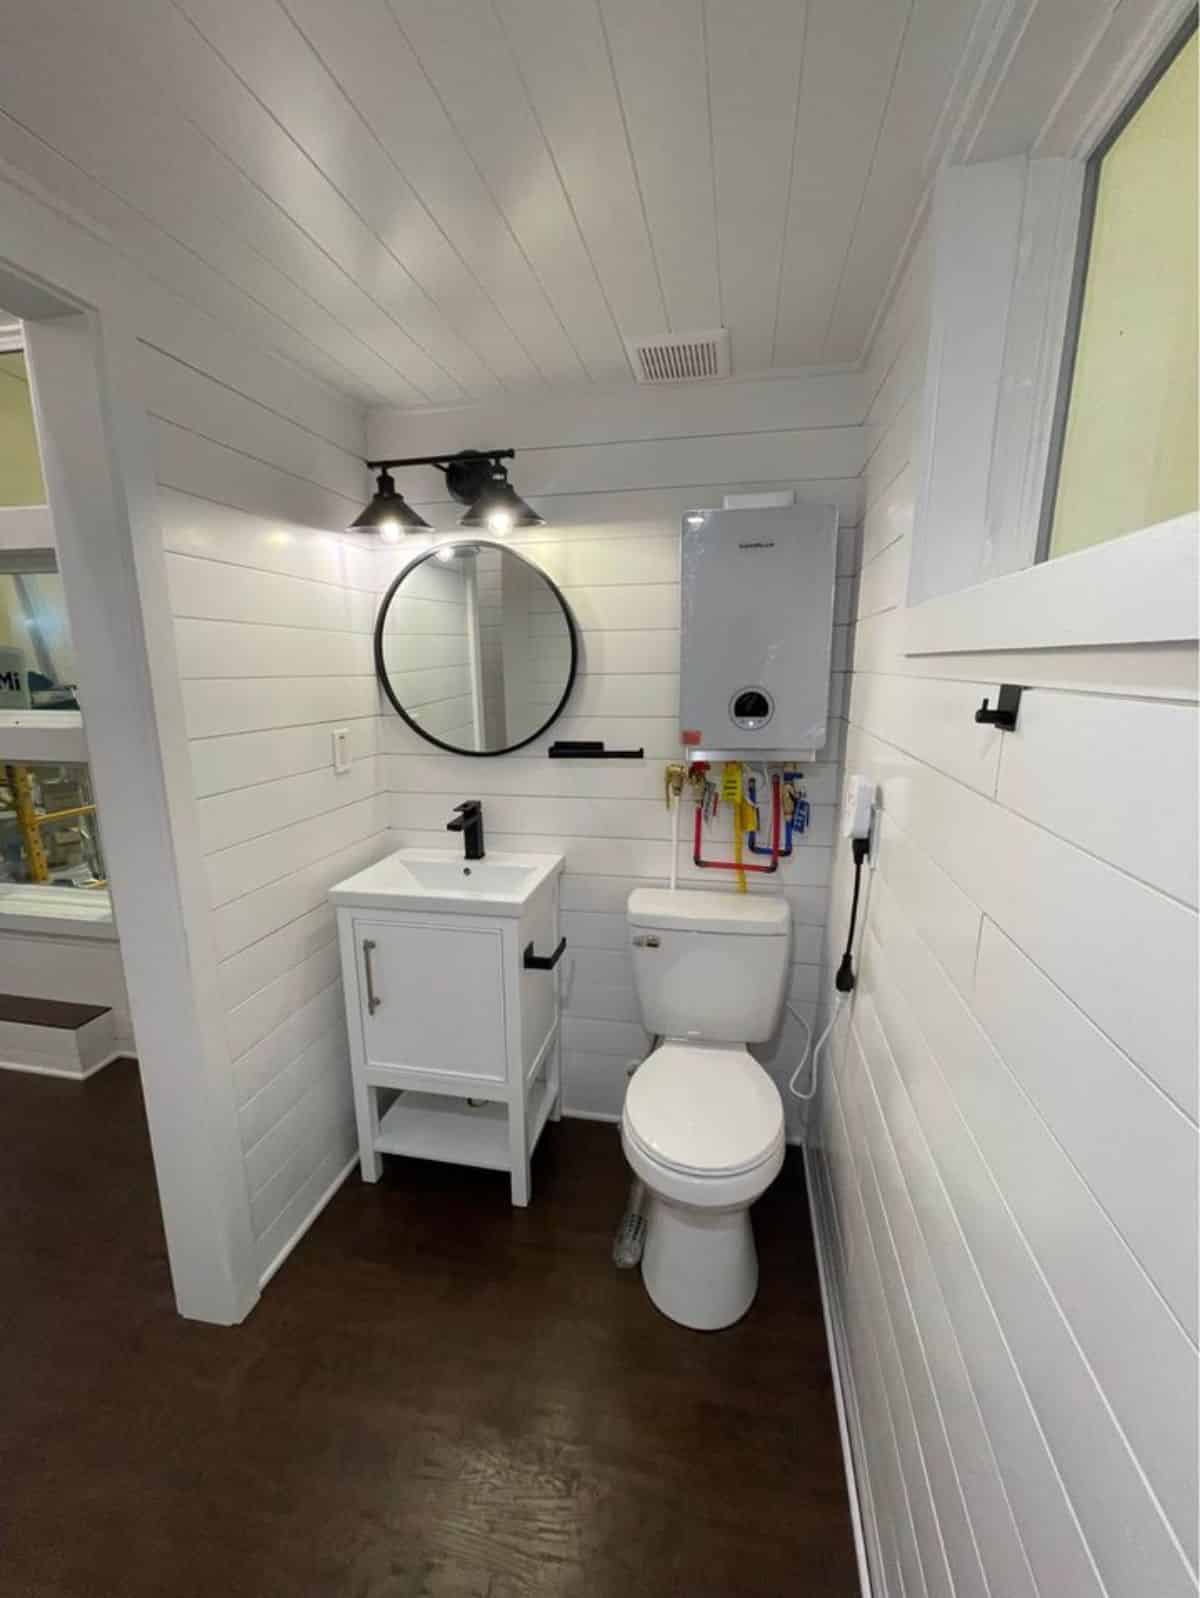 Bathroom of 20' Modern Tiny Home has a standard toilet, sink with vanity and mirror